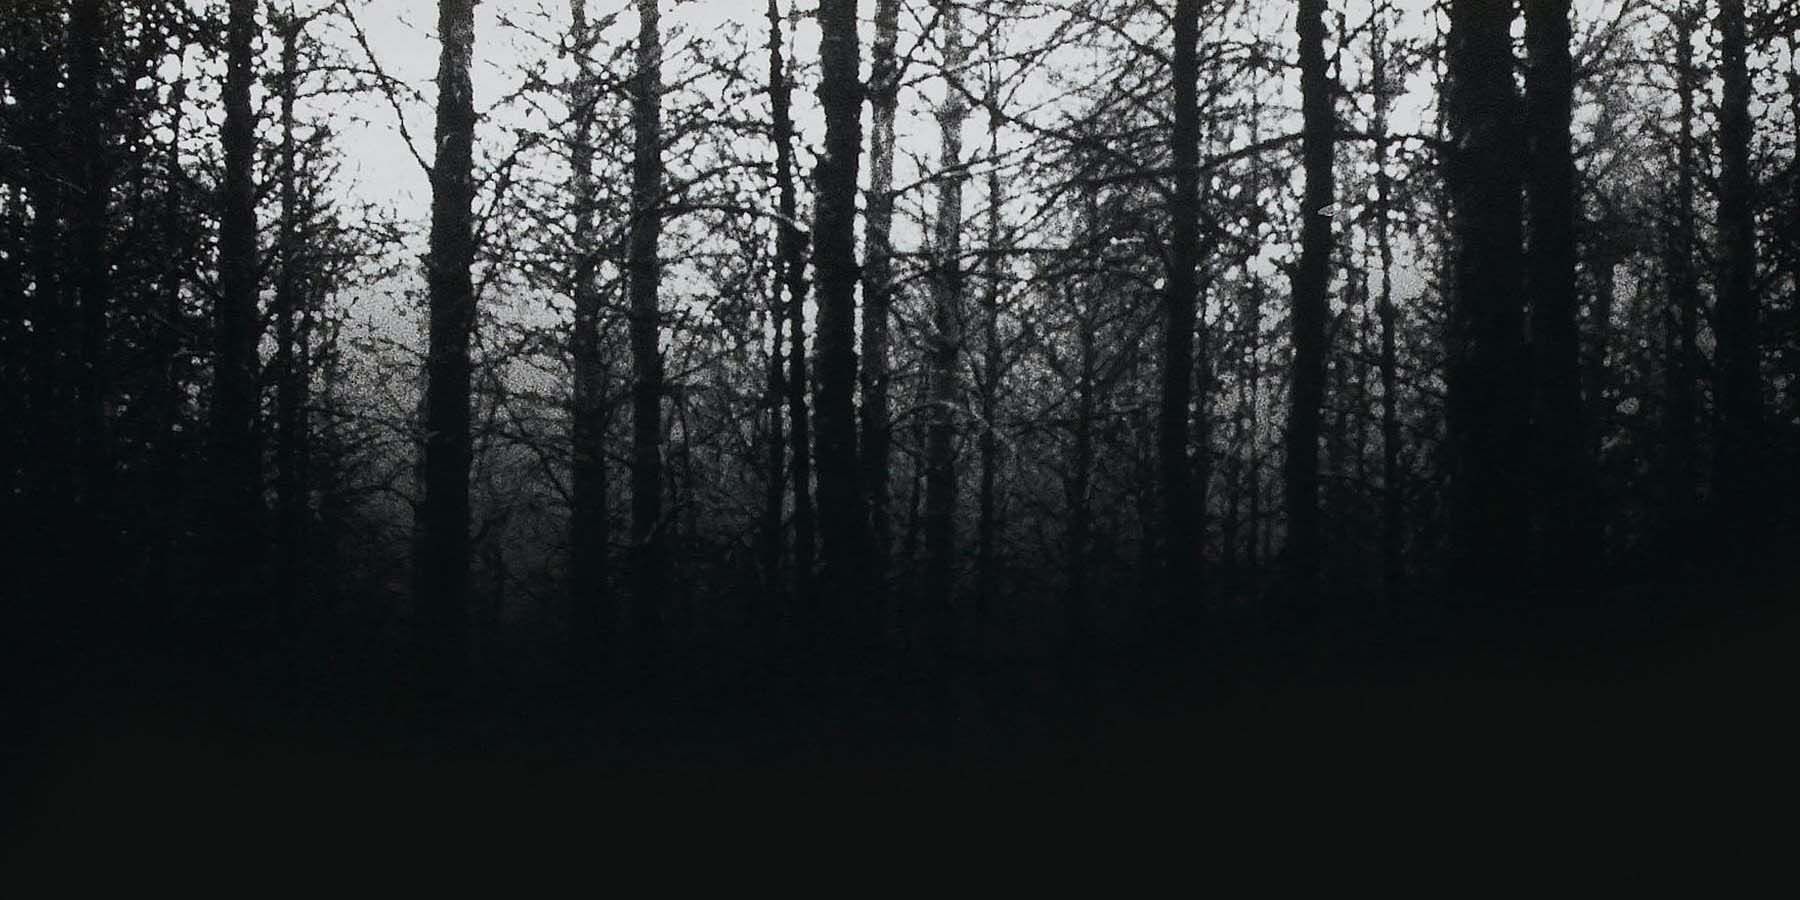 The Blair Witch Project (1999) forest